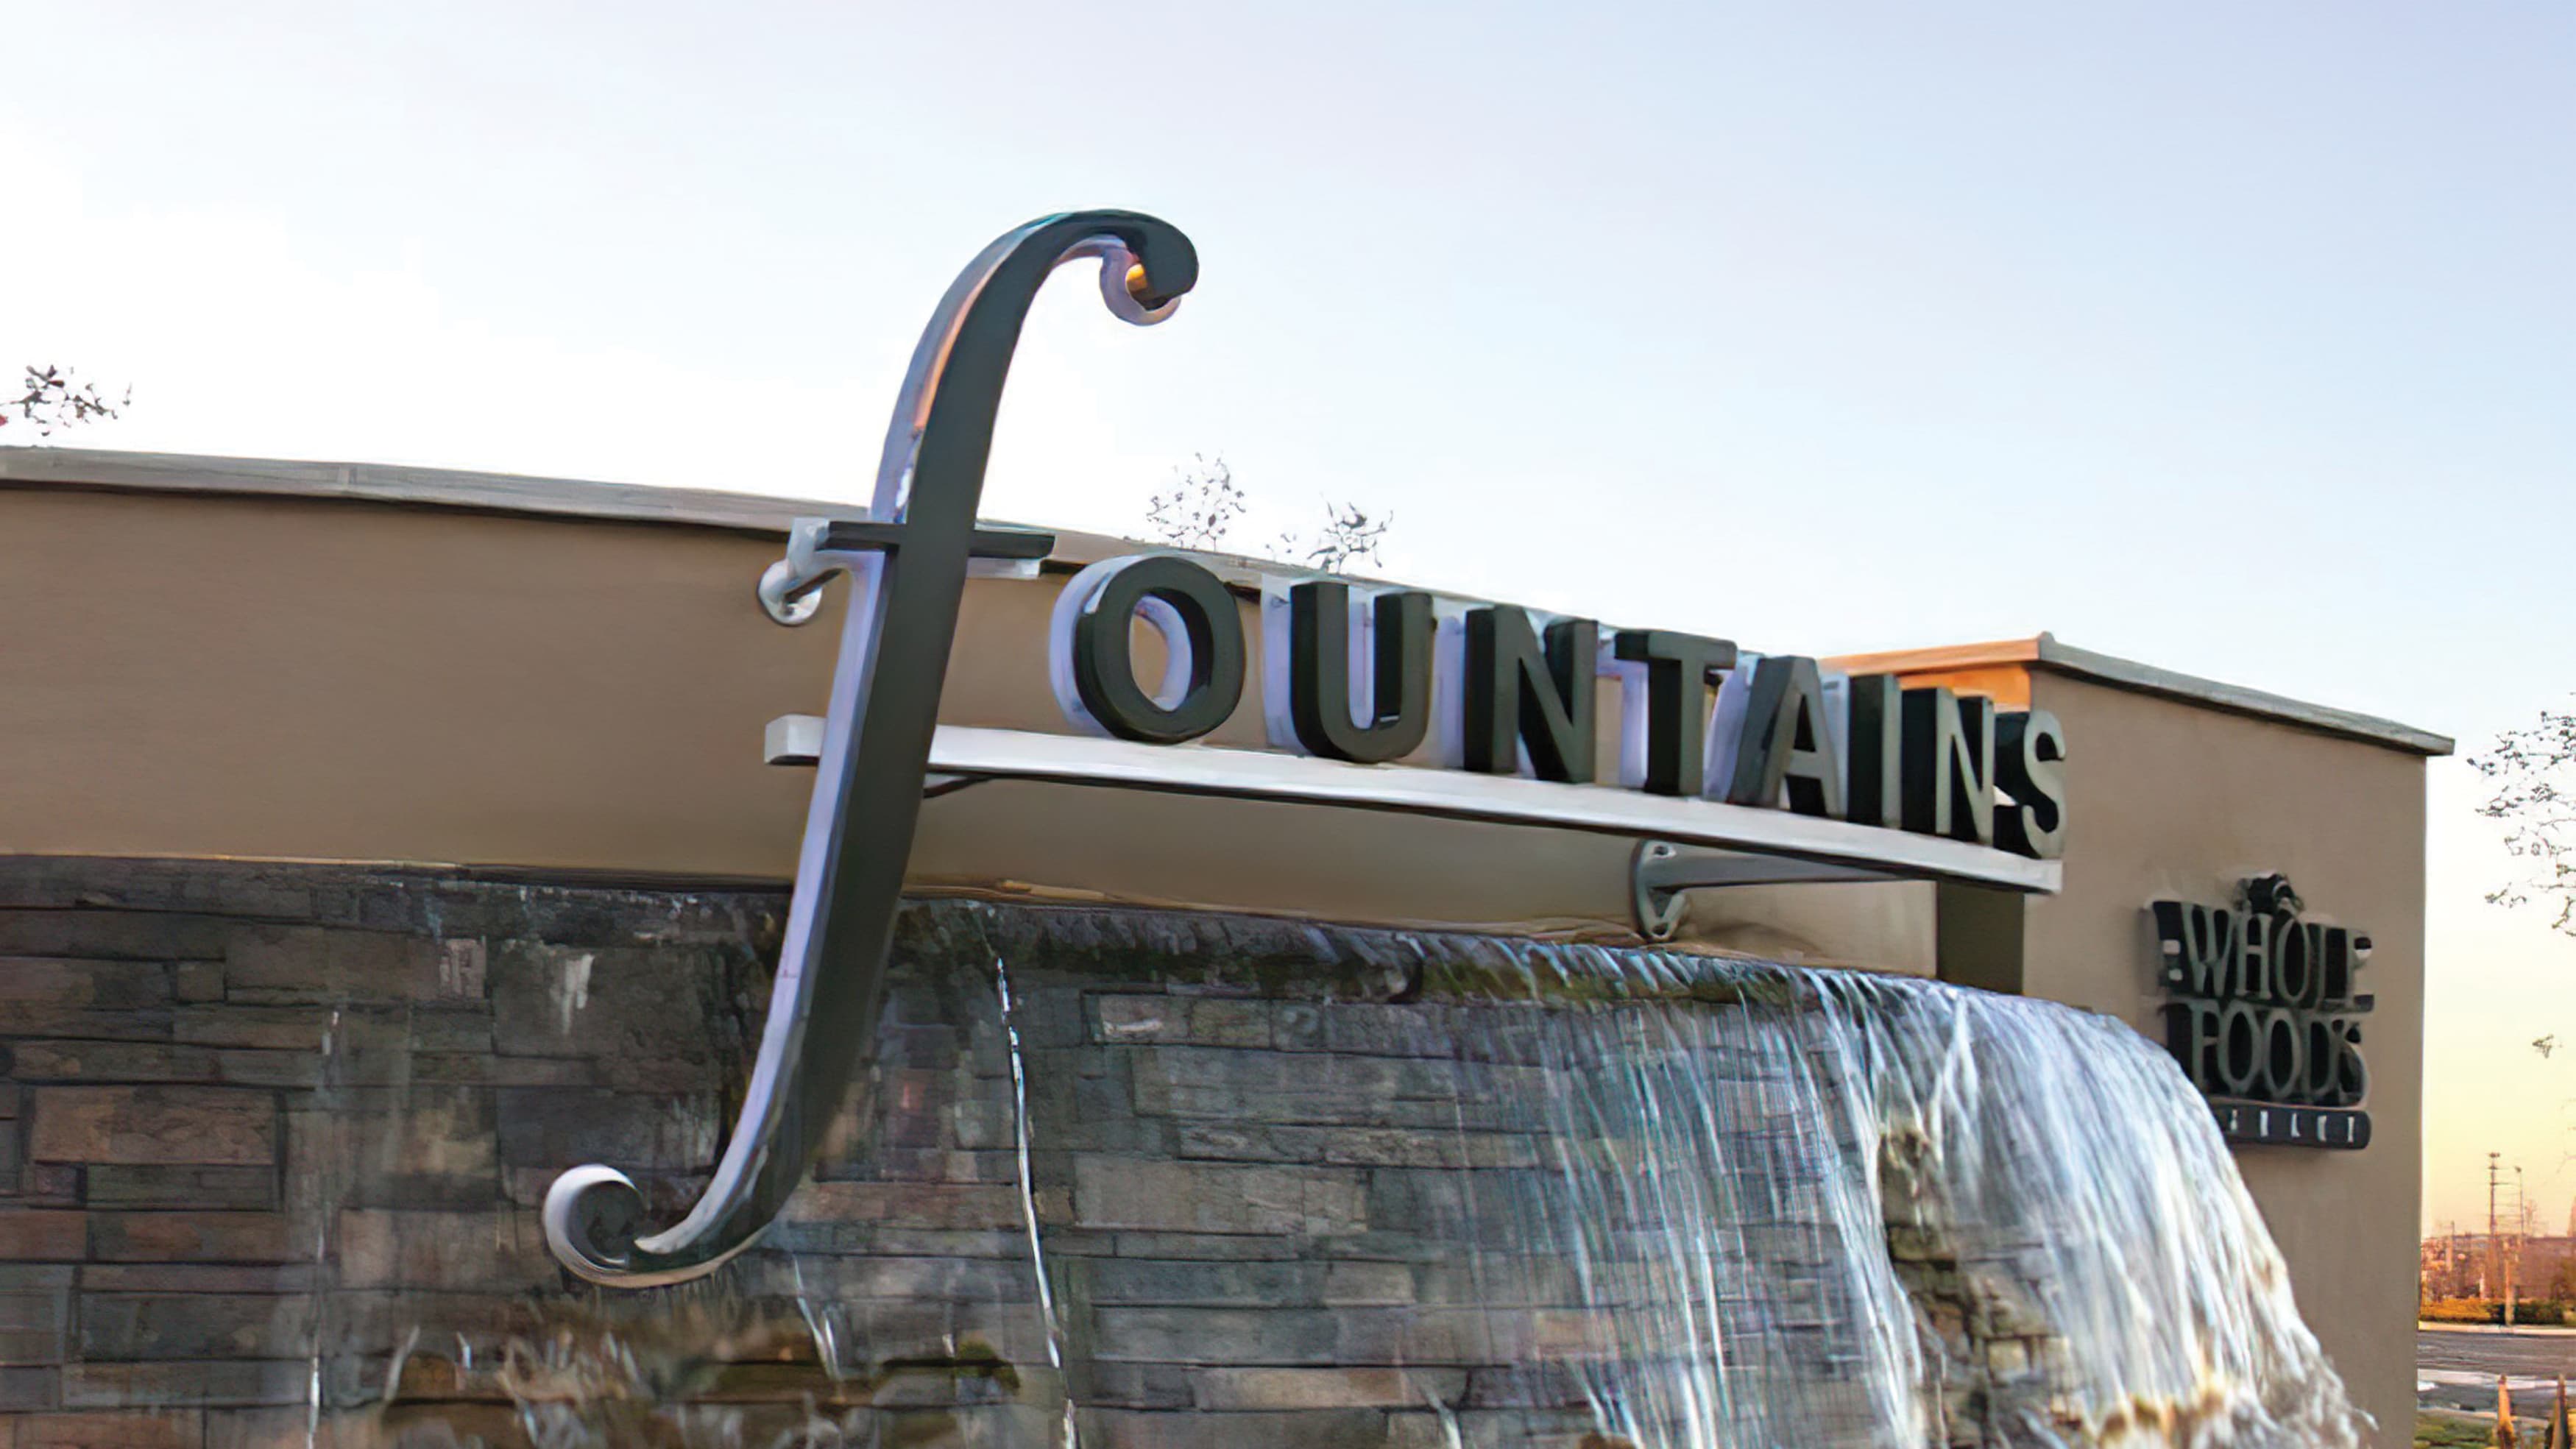 The Fountains at Roseville were recently recognized with an honorable mention award in the latest Signs of the Times 2009 International Sign Contest